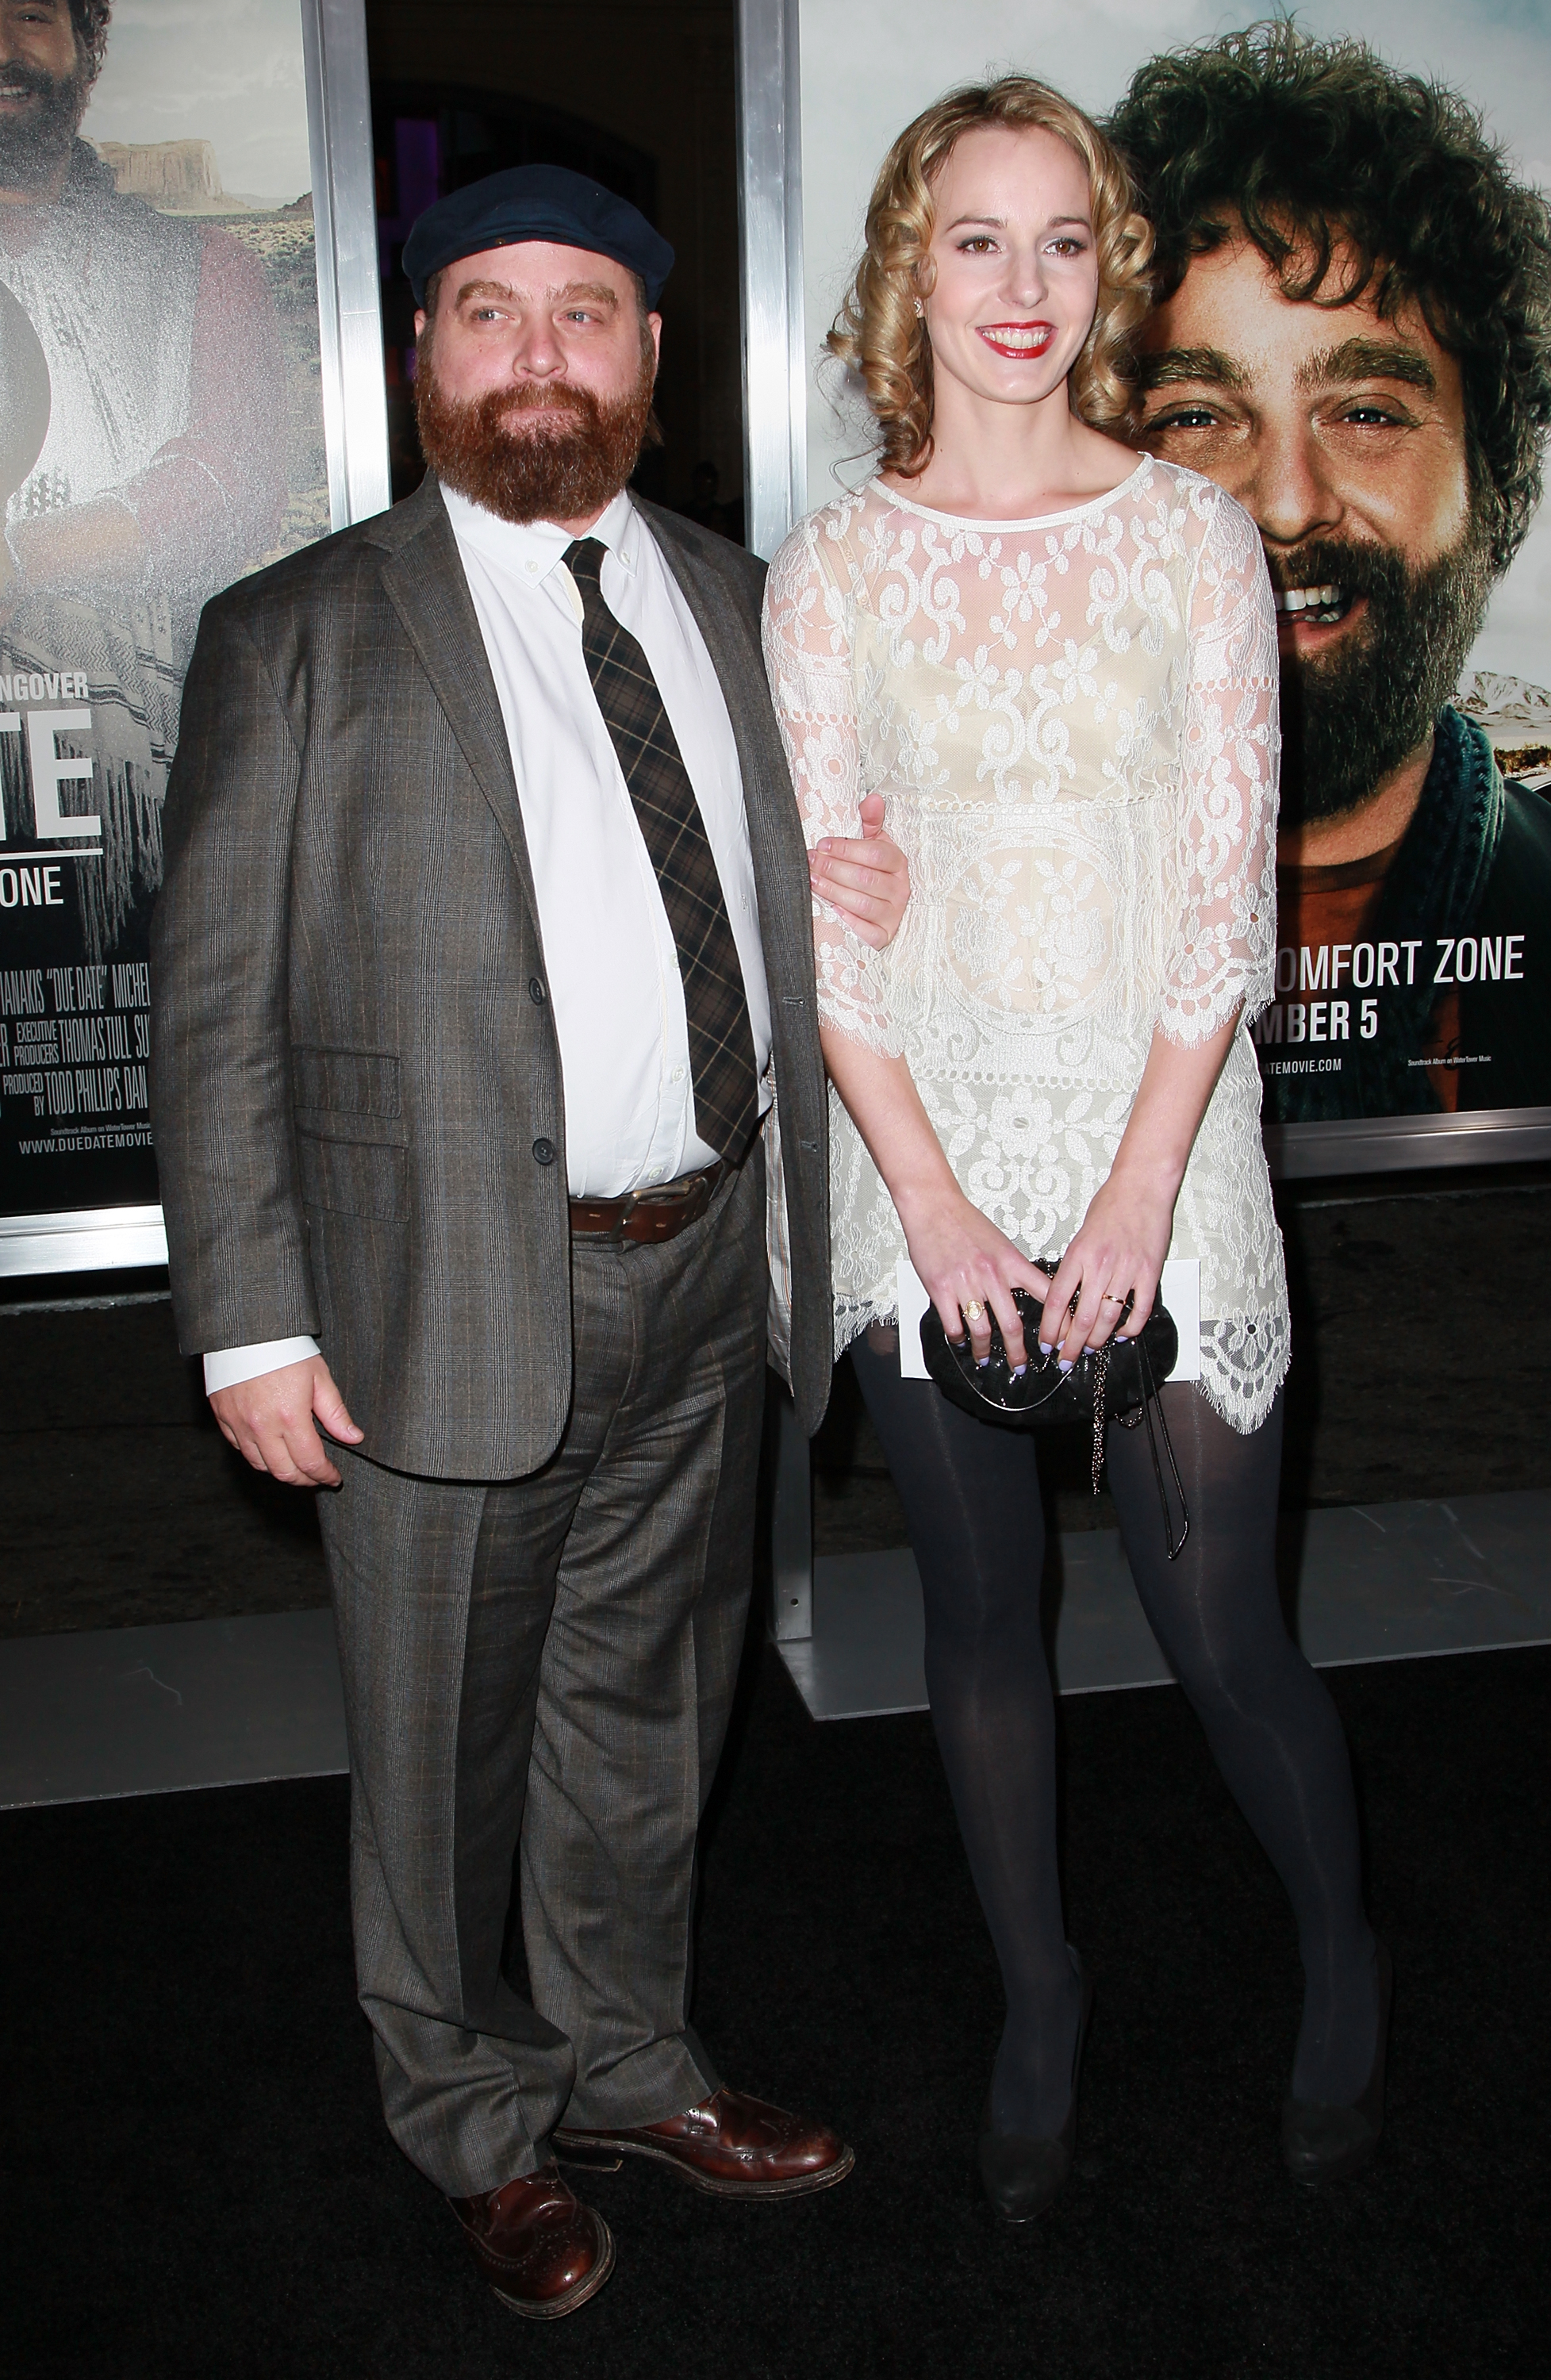 Zach Galifianakis and Quinn Lundberg attend the Warner Bros. Pictures' "Due Date" premiere at Grauman's Chinese Theater on October 28, 2010, in Los Angeles, California. | Source: Getty Images